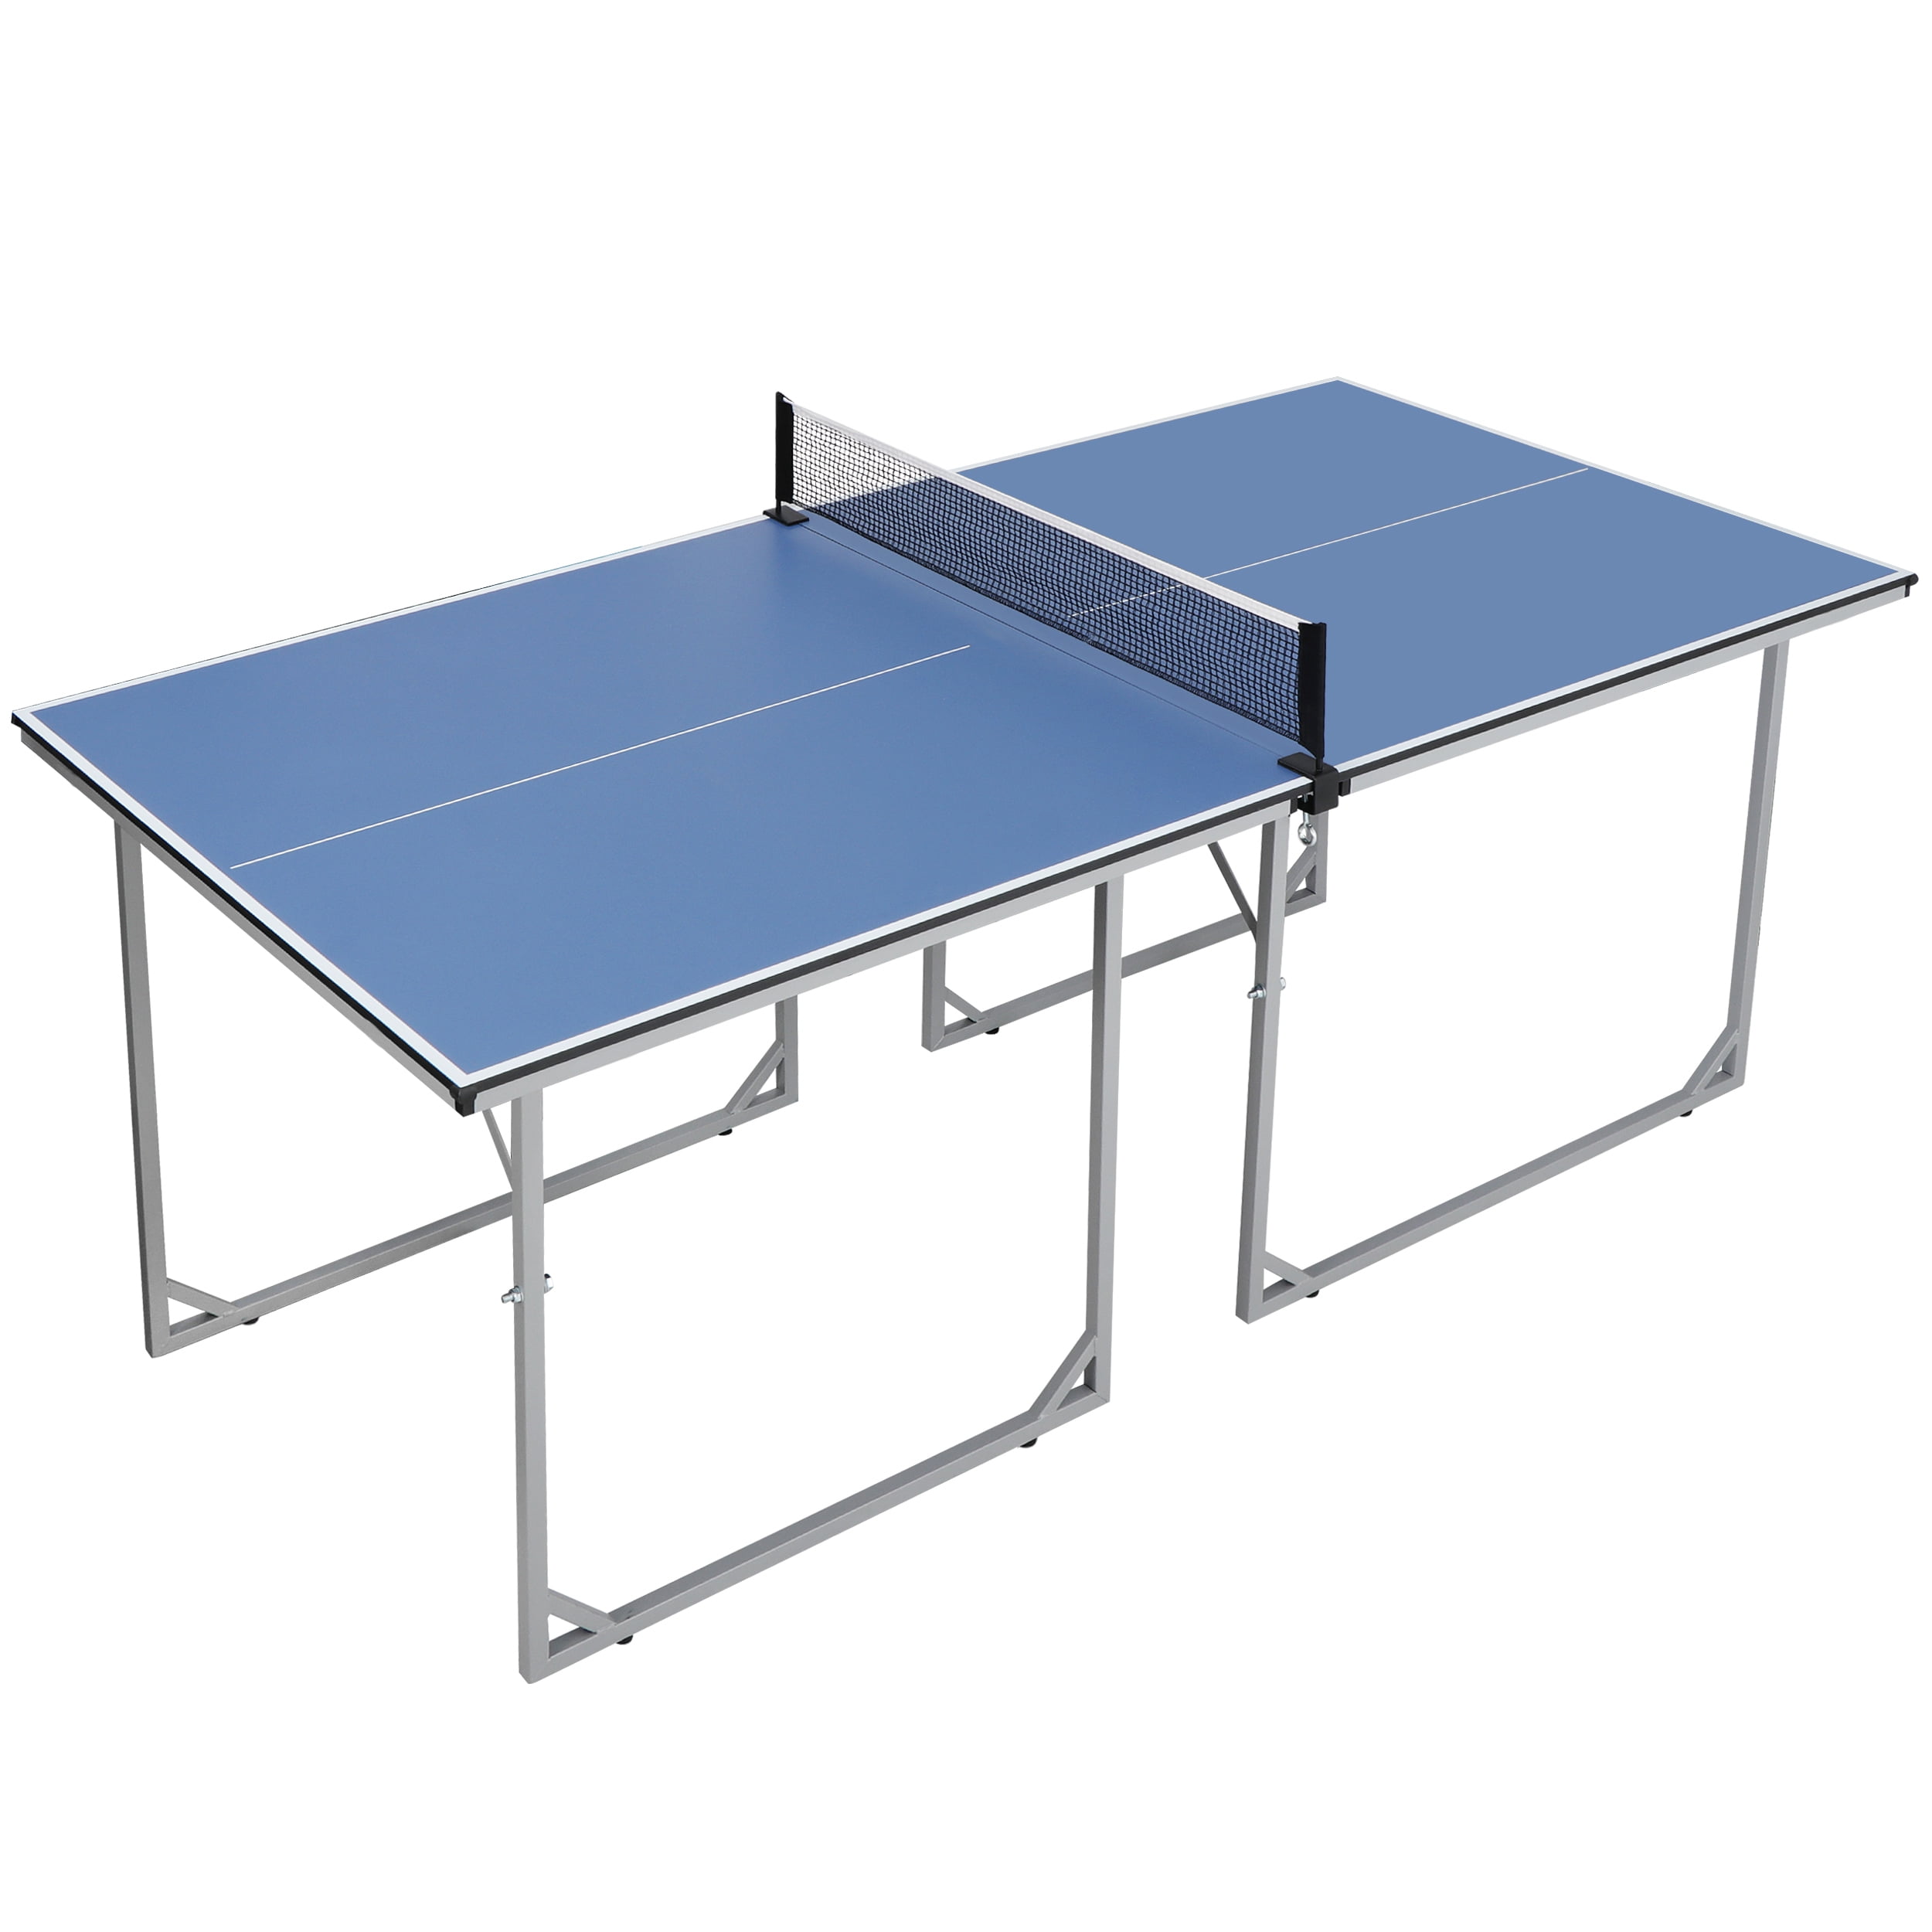 NEW ESPN Official Size Ping Pong Table Tennis Table Metal 4 Piece Indoor Folding 